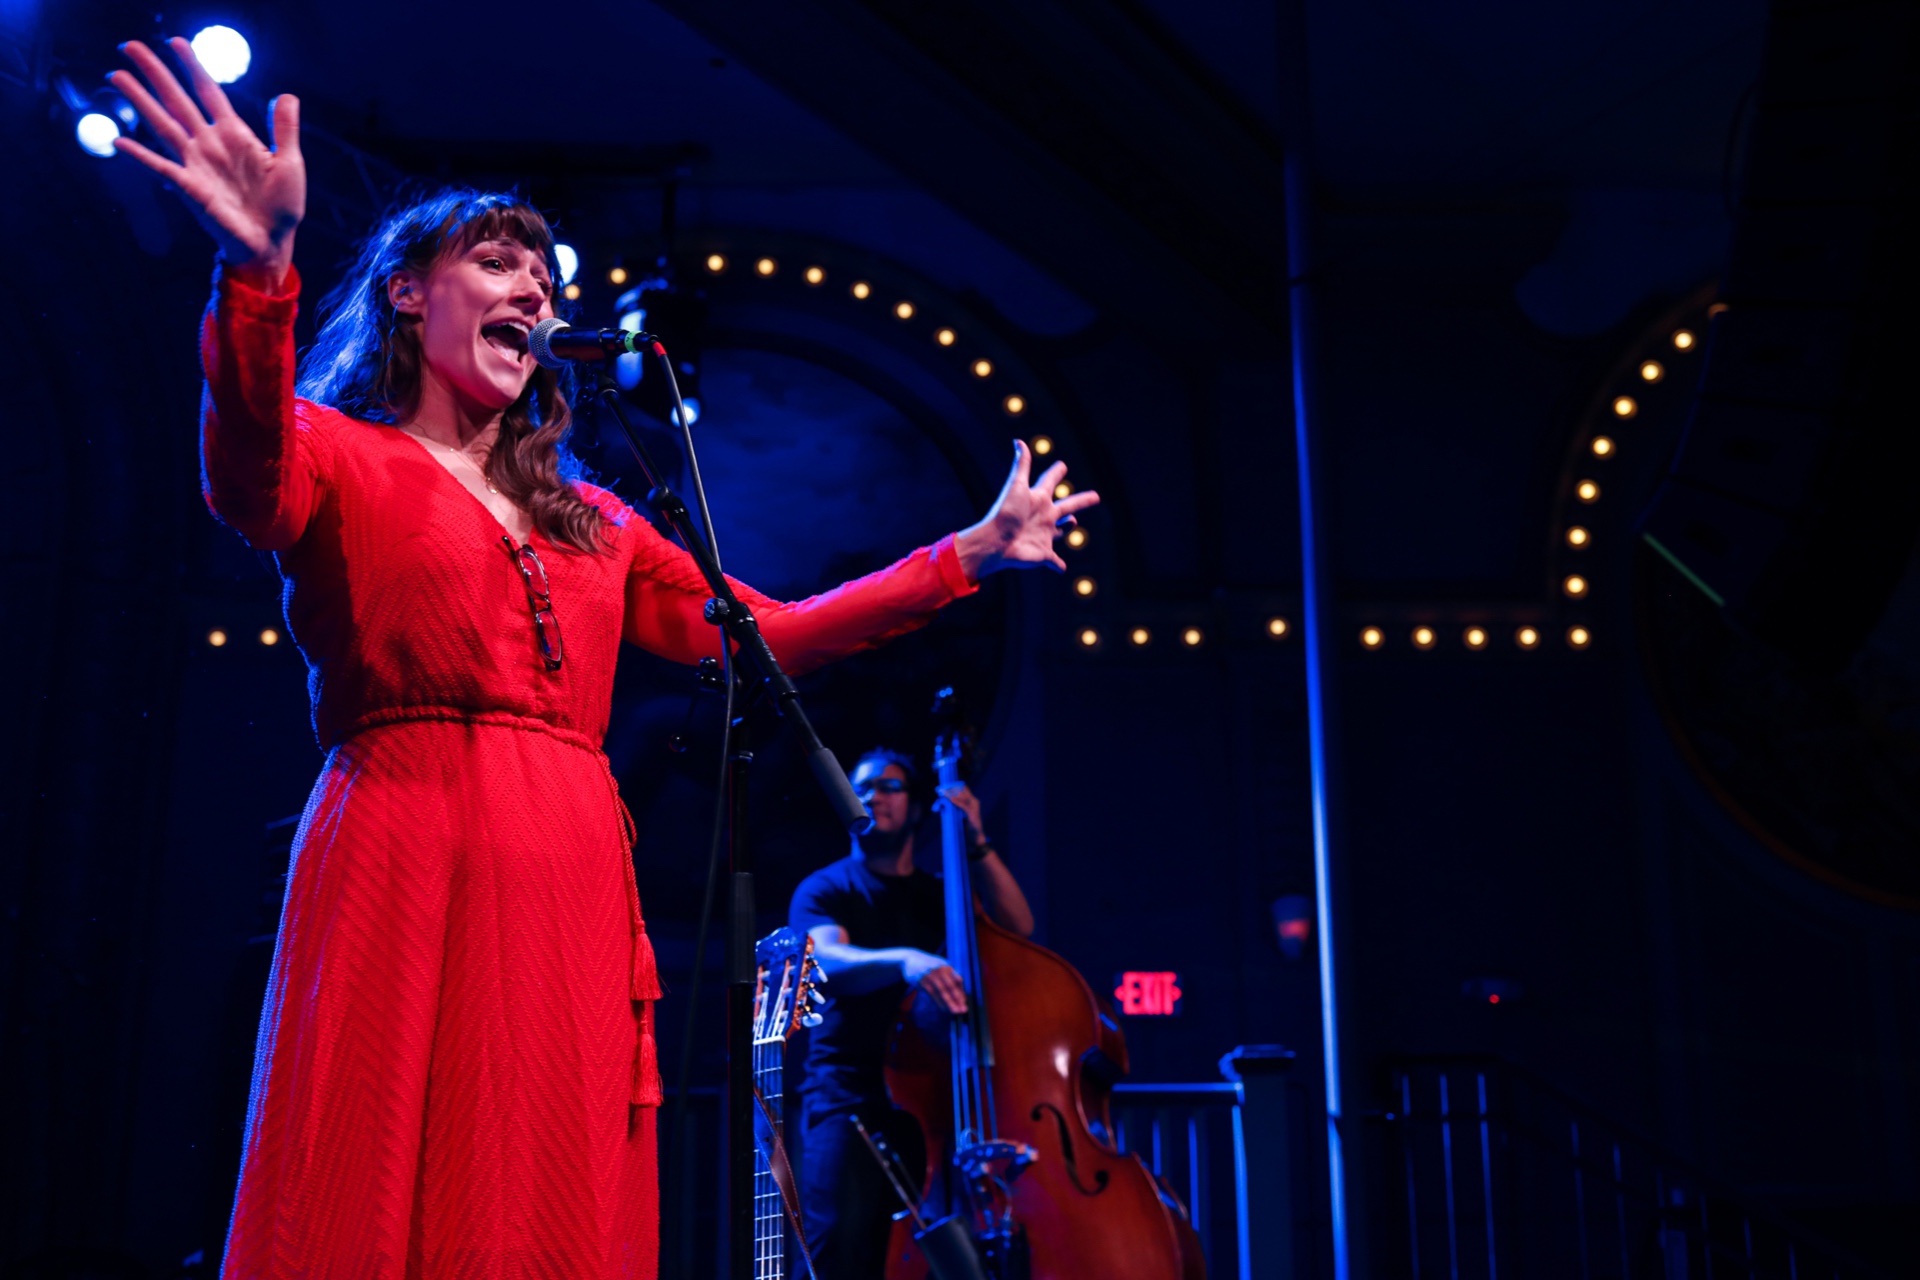 Stephanie Strange in a red dress plays on a moody stage with band